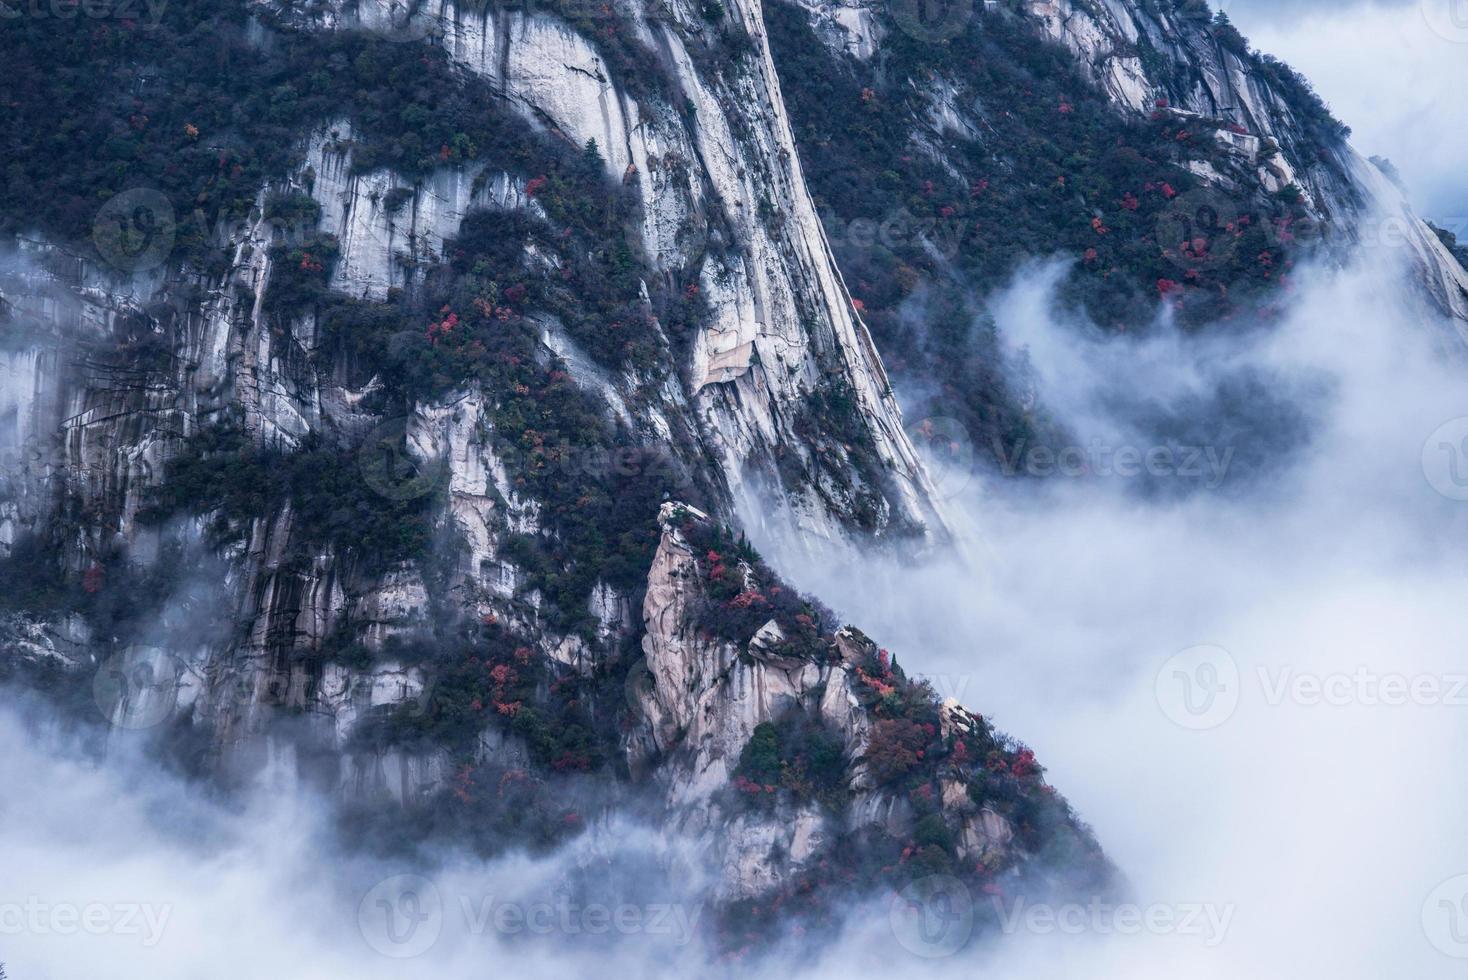 Huashan mountain. The highest of China five sacred mountains, called the West Mountain,well known for steep trails, breath-taking cliffs and grand scenery photo